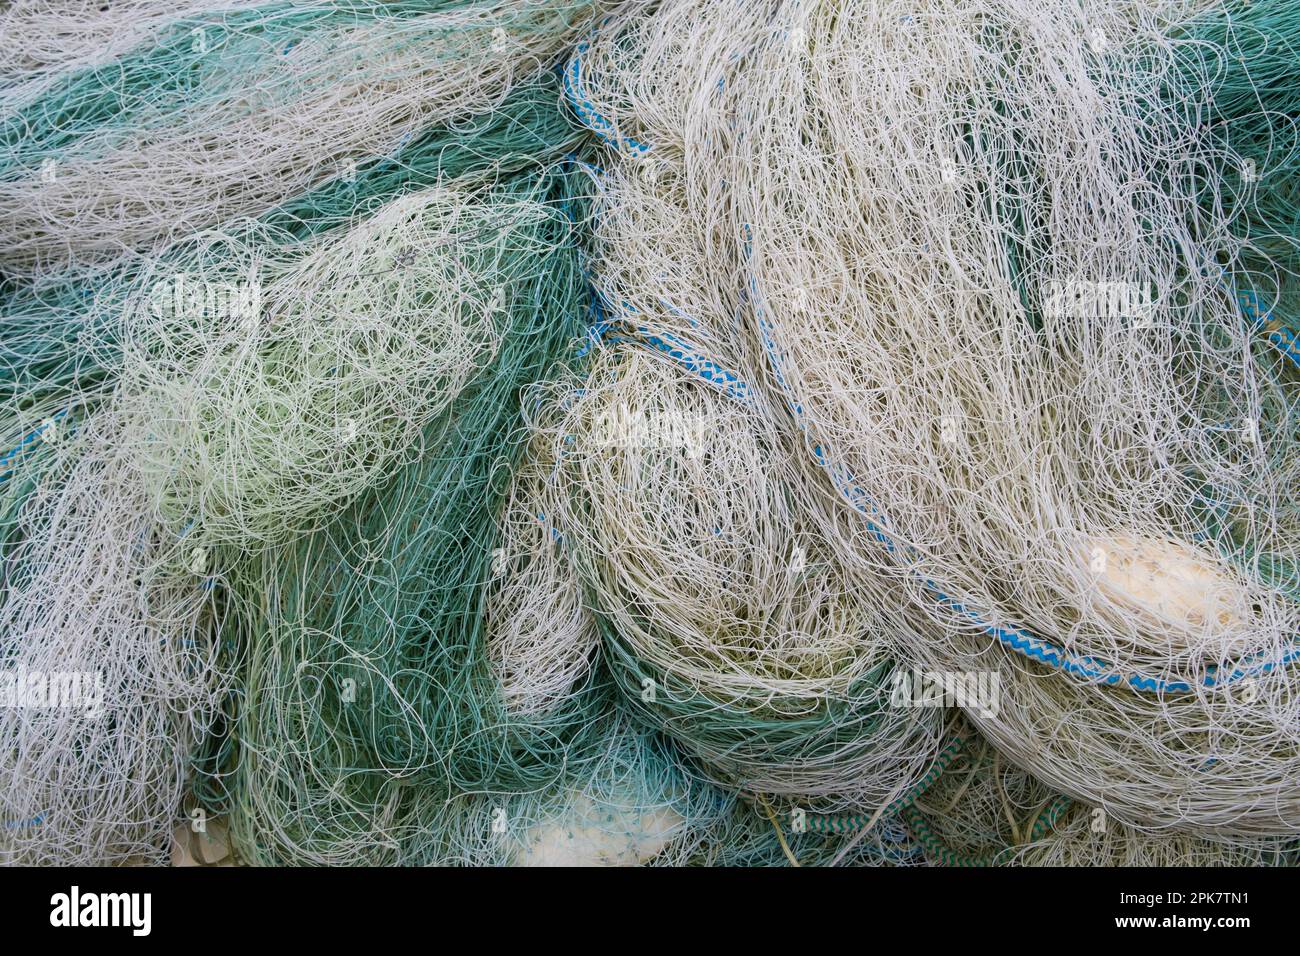 A pile of commercial fishing nets, blue green and white. Stock Photo